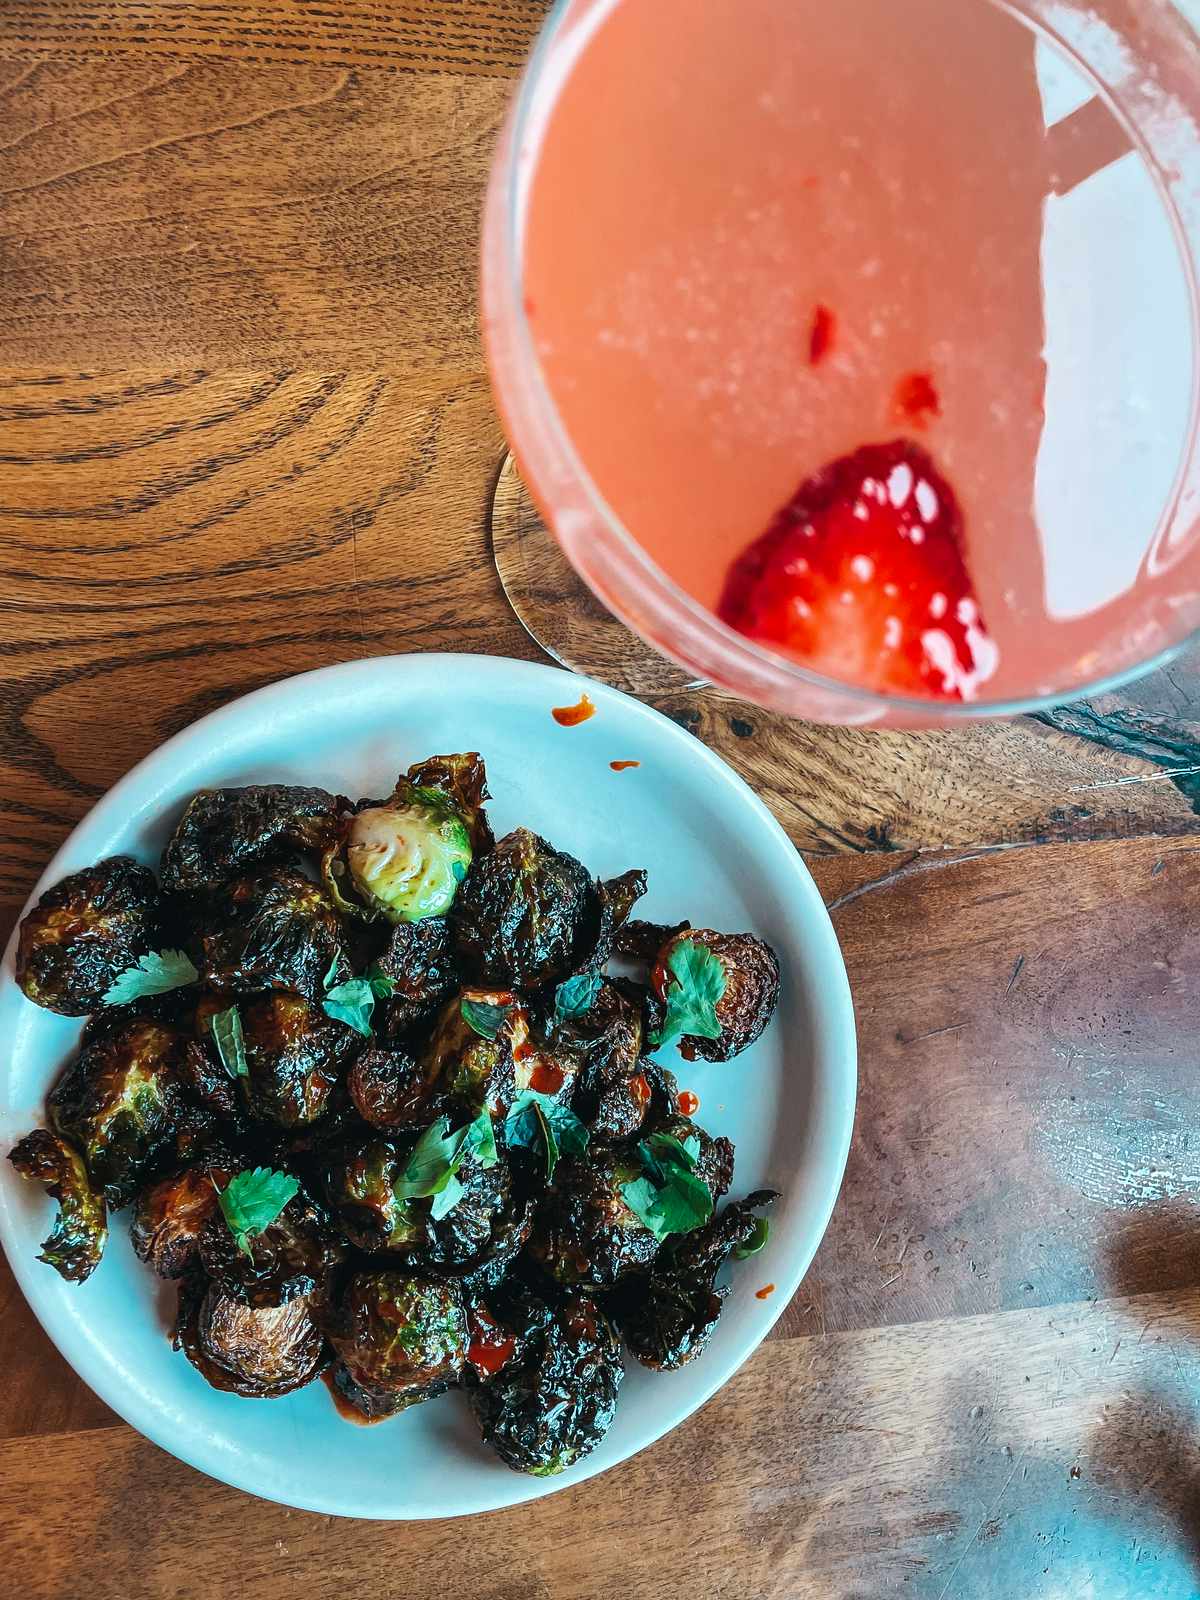 Brussel sprouts and cocktail from Culinary Dropout restaurant in Scottsdale Arizona